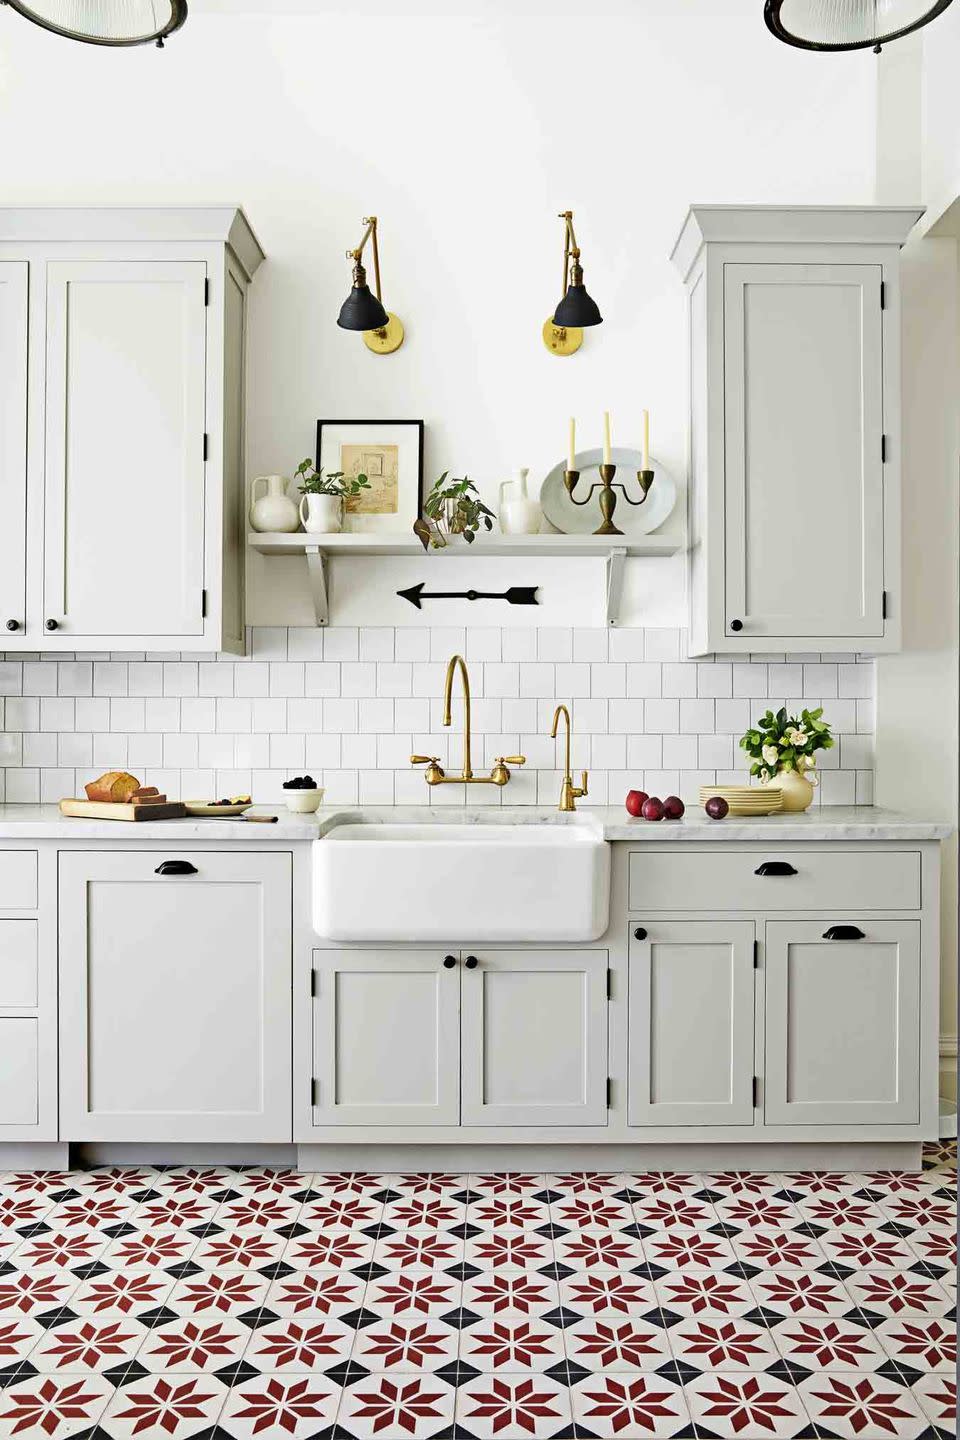 Patterned Floor in a White Kitchen